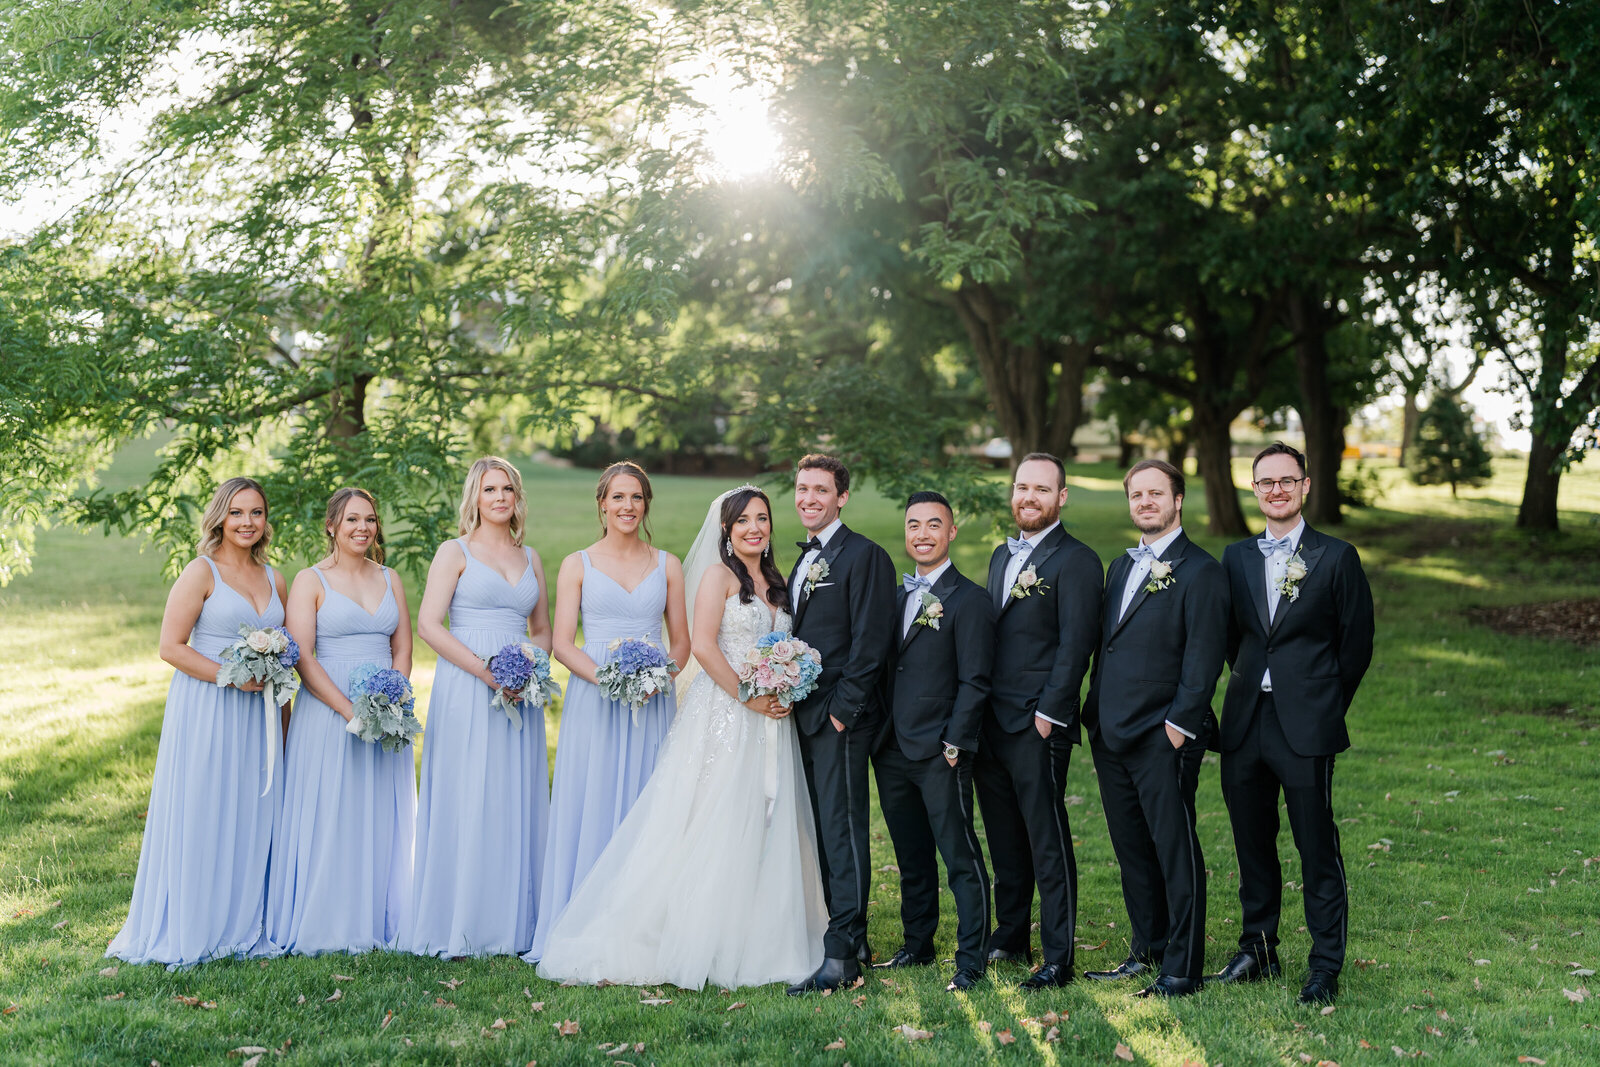 Wedding bridal party, in soft blue dresses and soft sunlight in nabckgroun